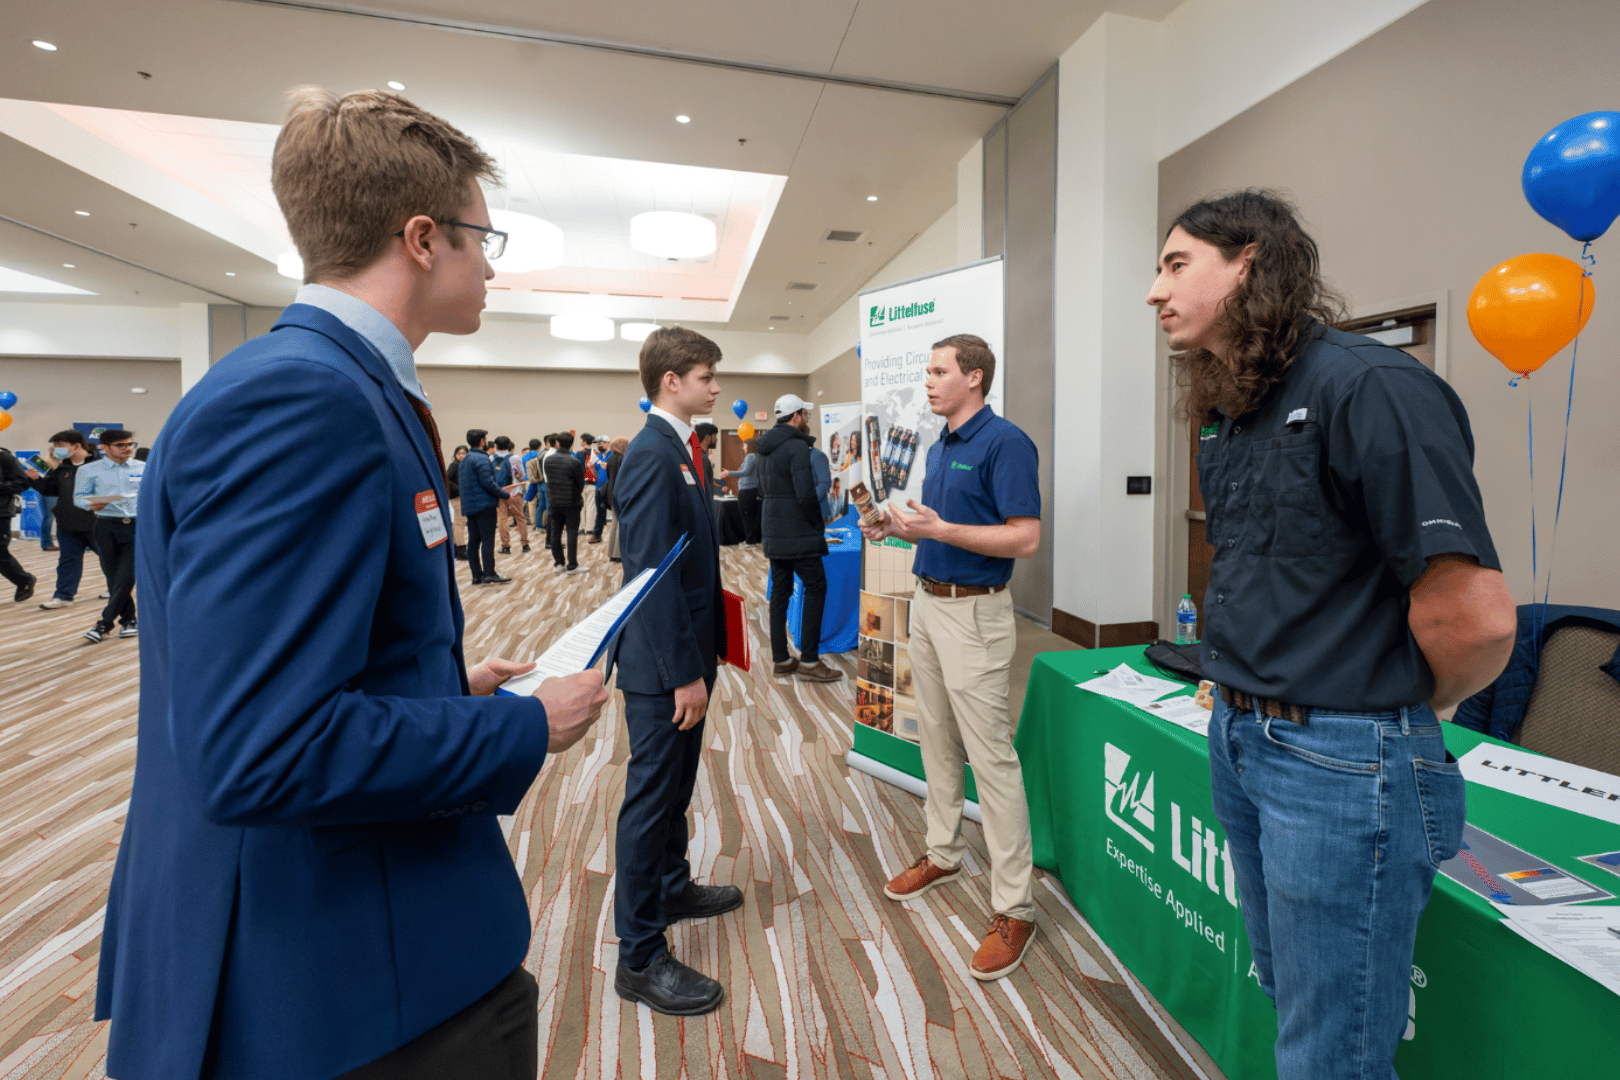 Students and recruiters conversing at Littelfuse table